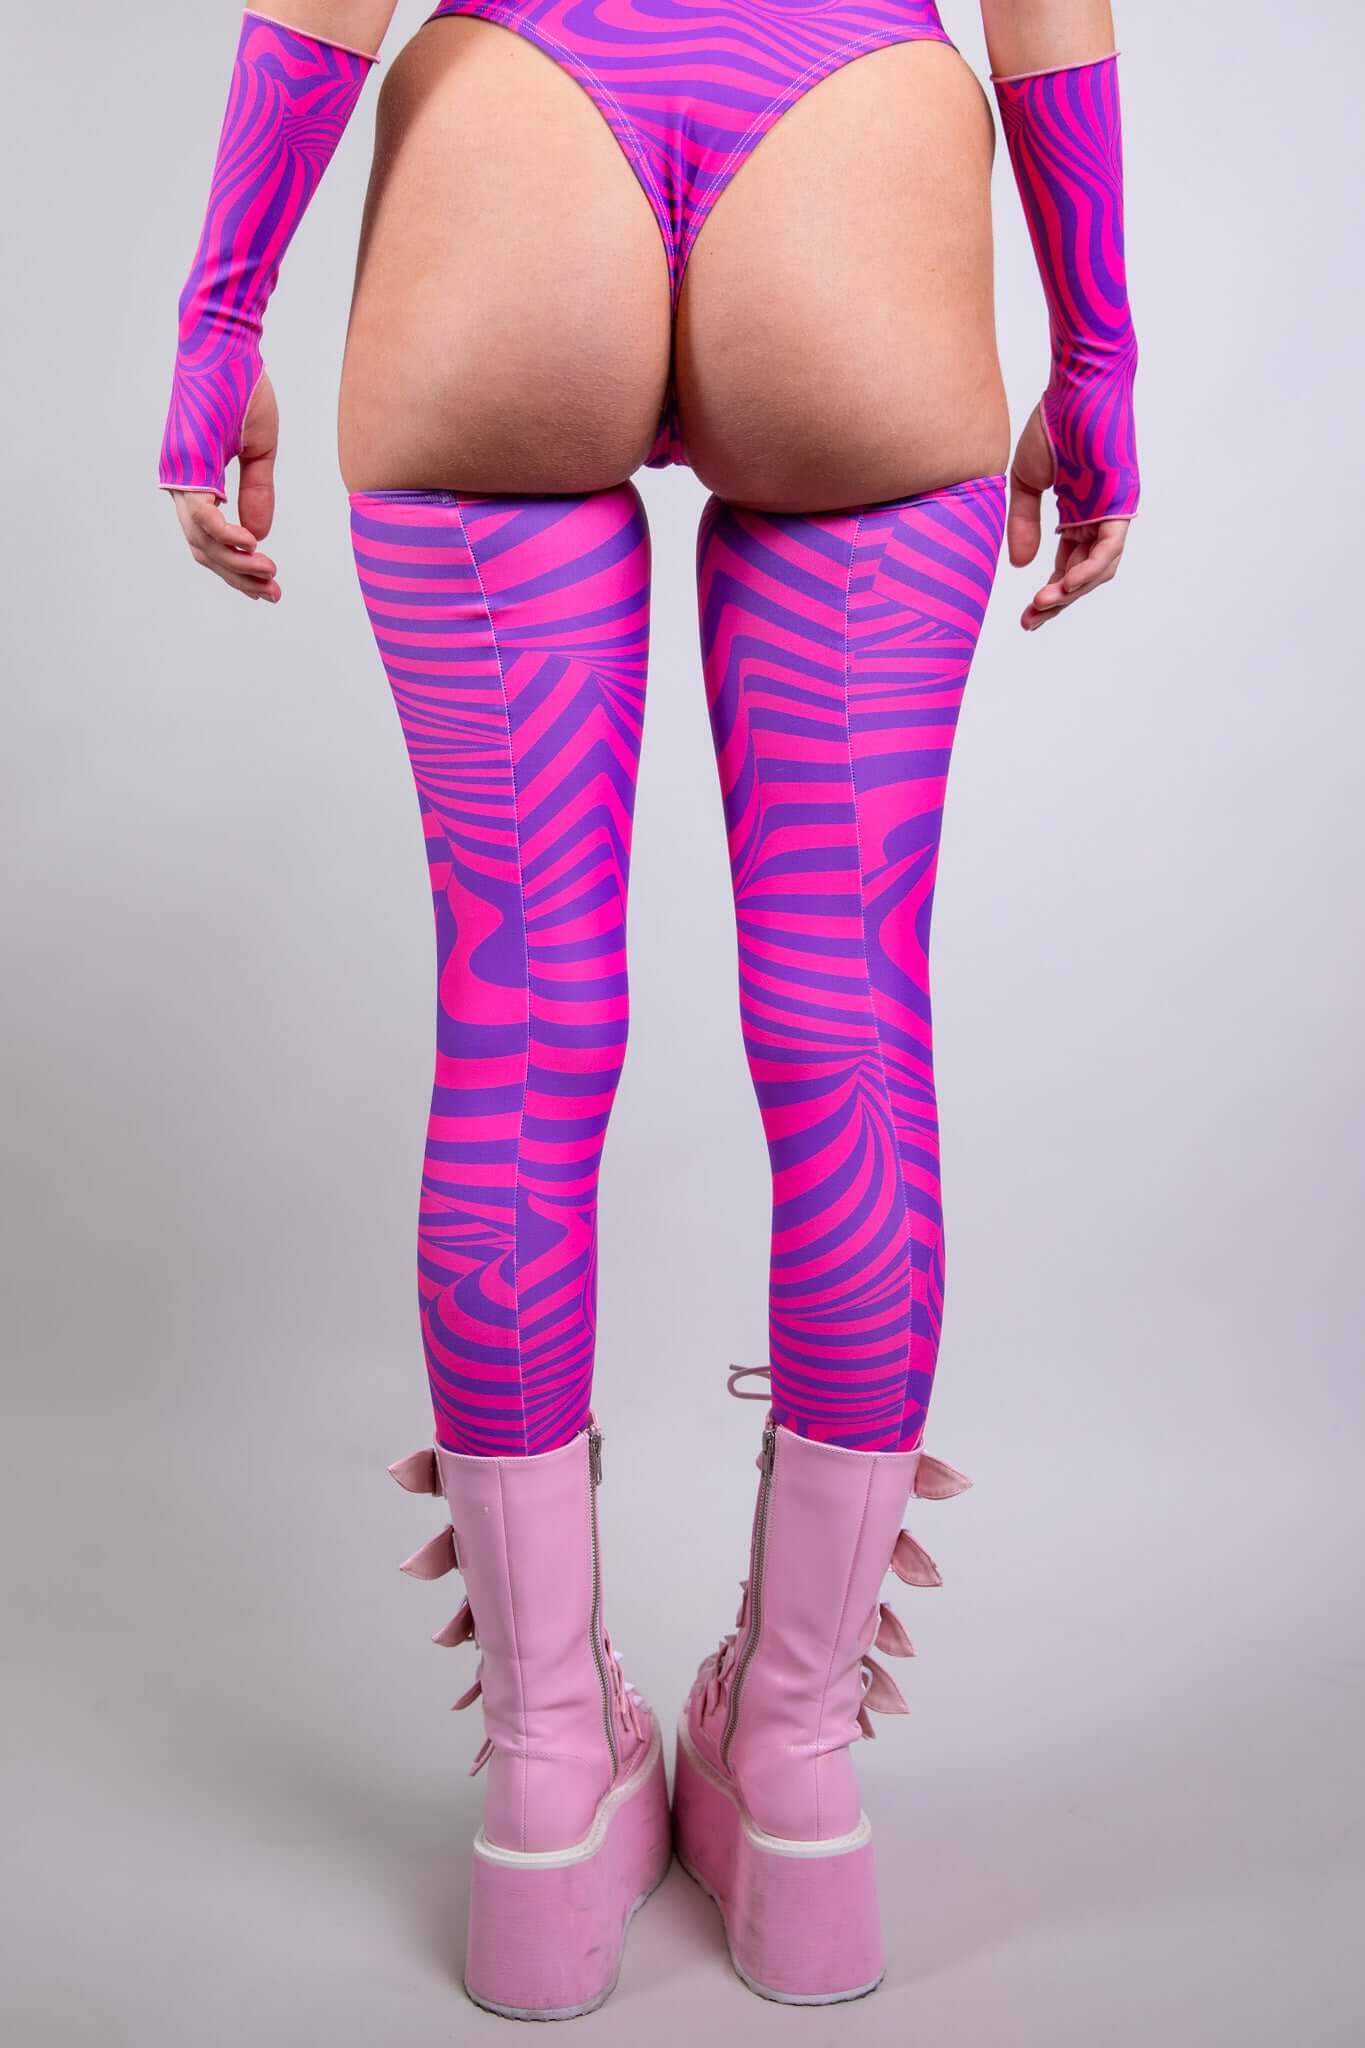 Cheshire Leg Sleeves Freedom Rave Wear Size: X-Small